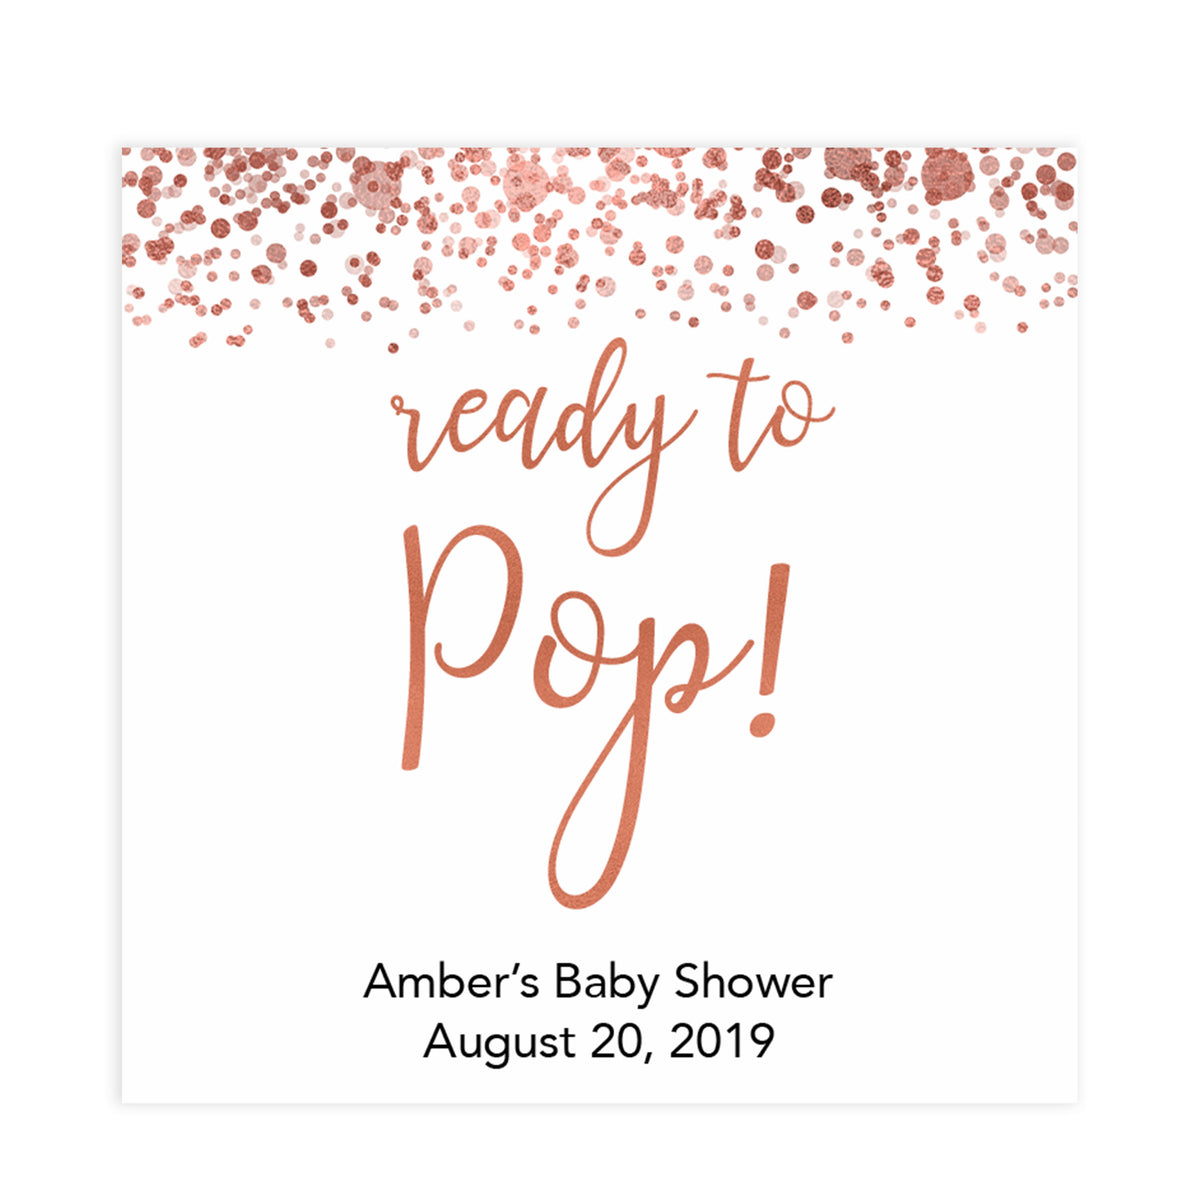 ready to pop baby tags, editable ready to pop tags, Printable baby shower games, rose gold fun baby games, baby shower games, fun baby shower ideas, top baby shower ideas, blush baby shower, rose gold baby shower ideas